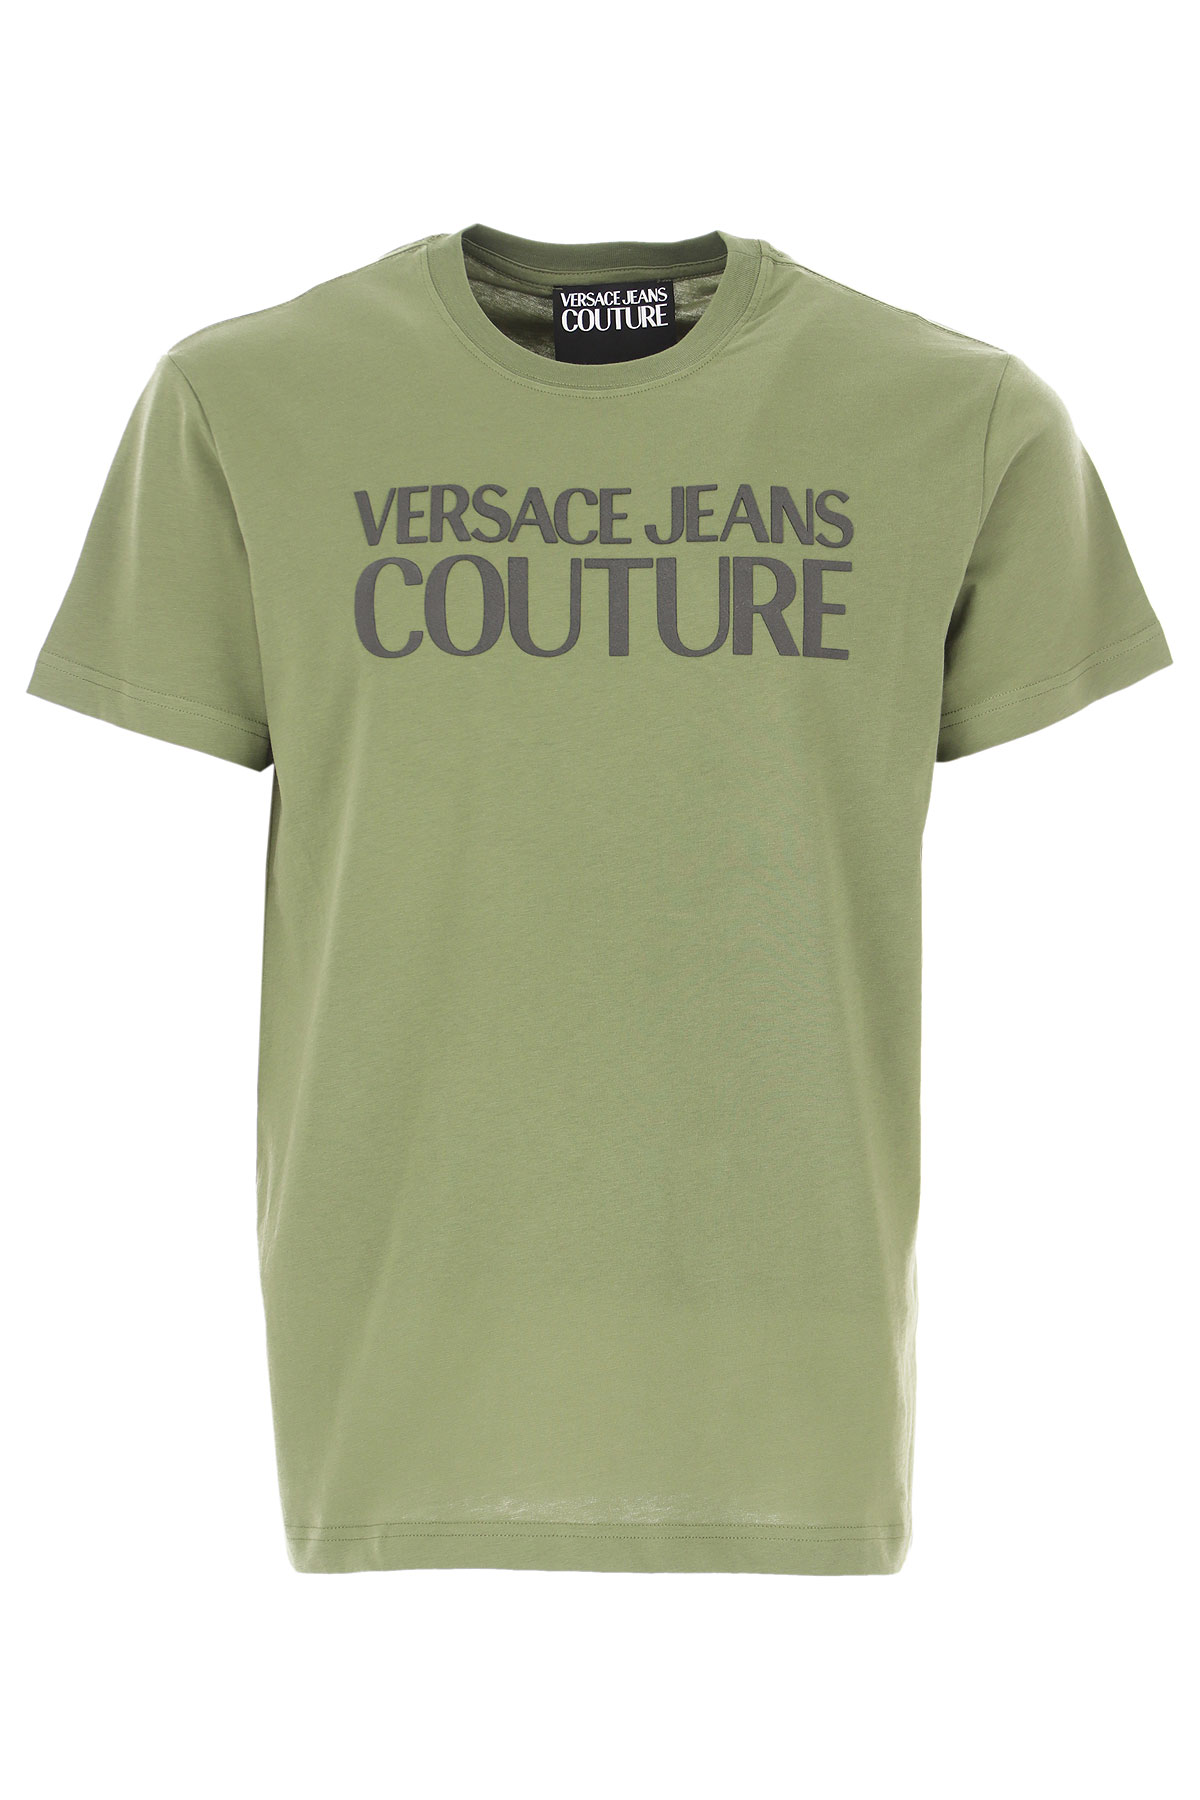 Peer Favorite Versace Jeans Couture T-Shirt for Men, Military Green ...